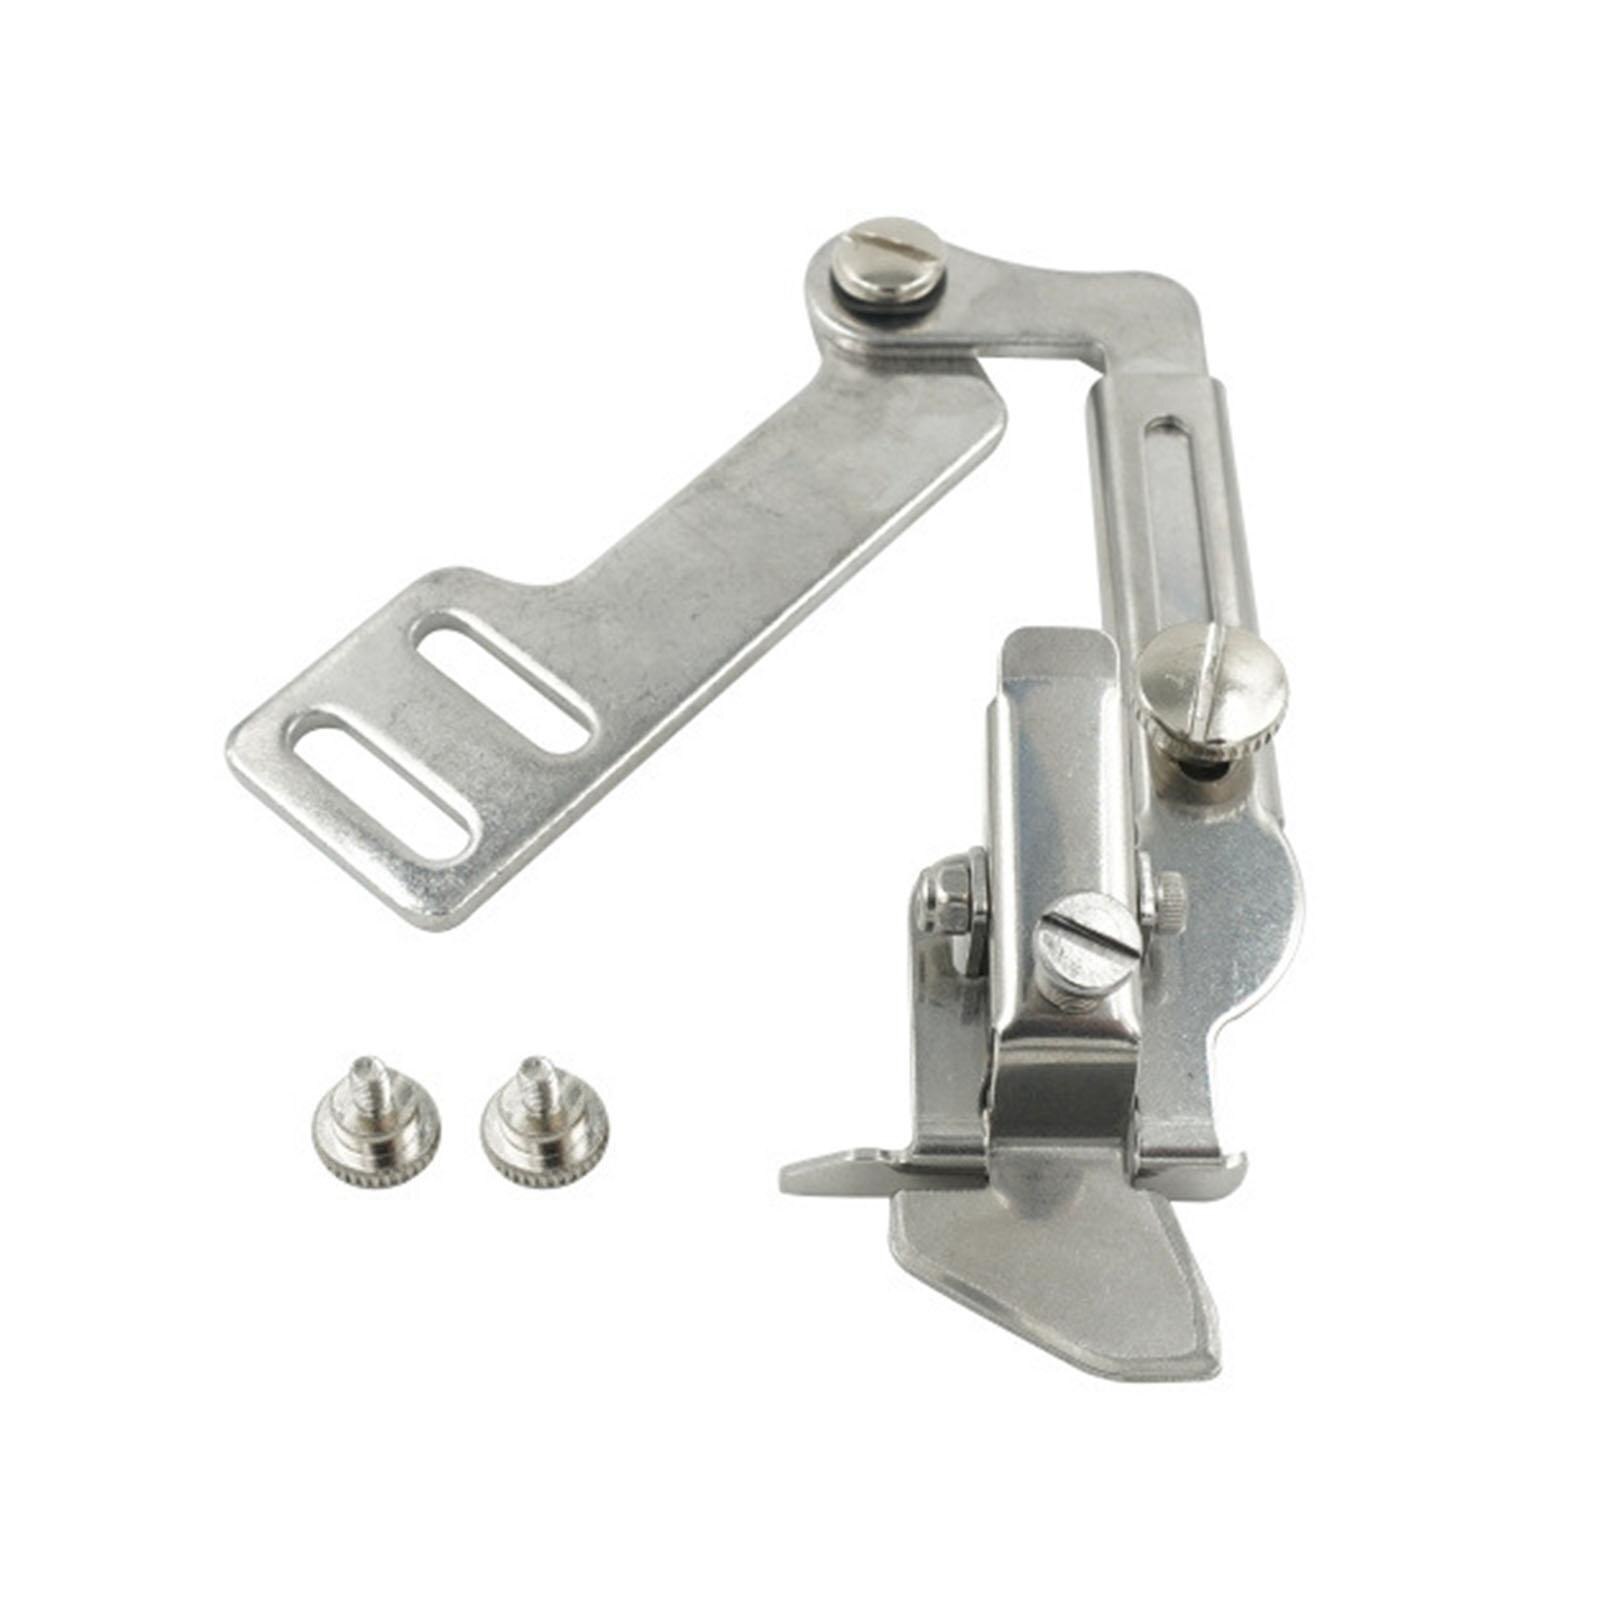 Metal Sewing Machine Presser Foot Industrial Sew Machines Edge Guide Curling Device for Lock Stitch Parts Quilting Patchwork